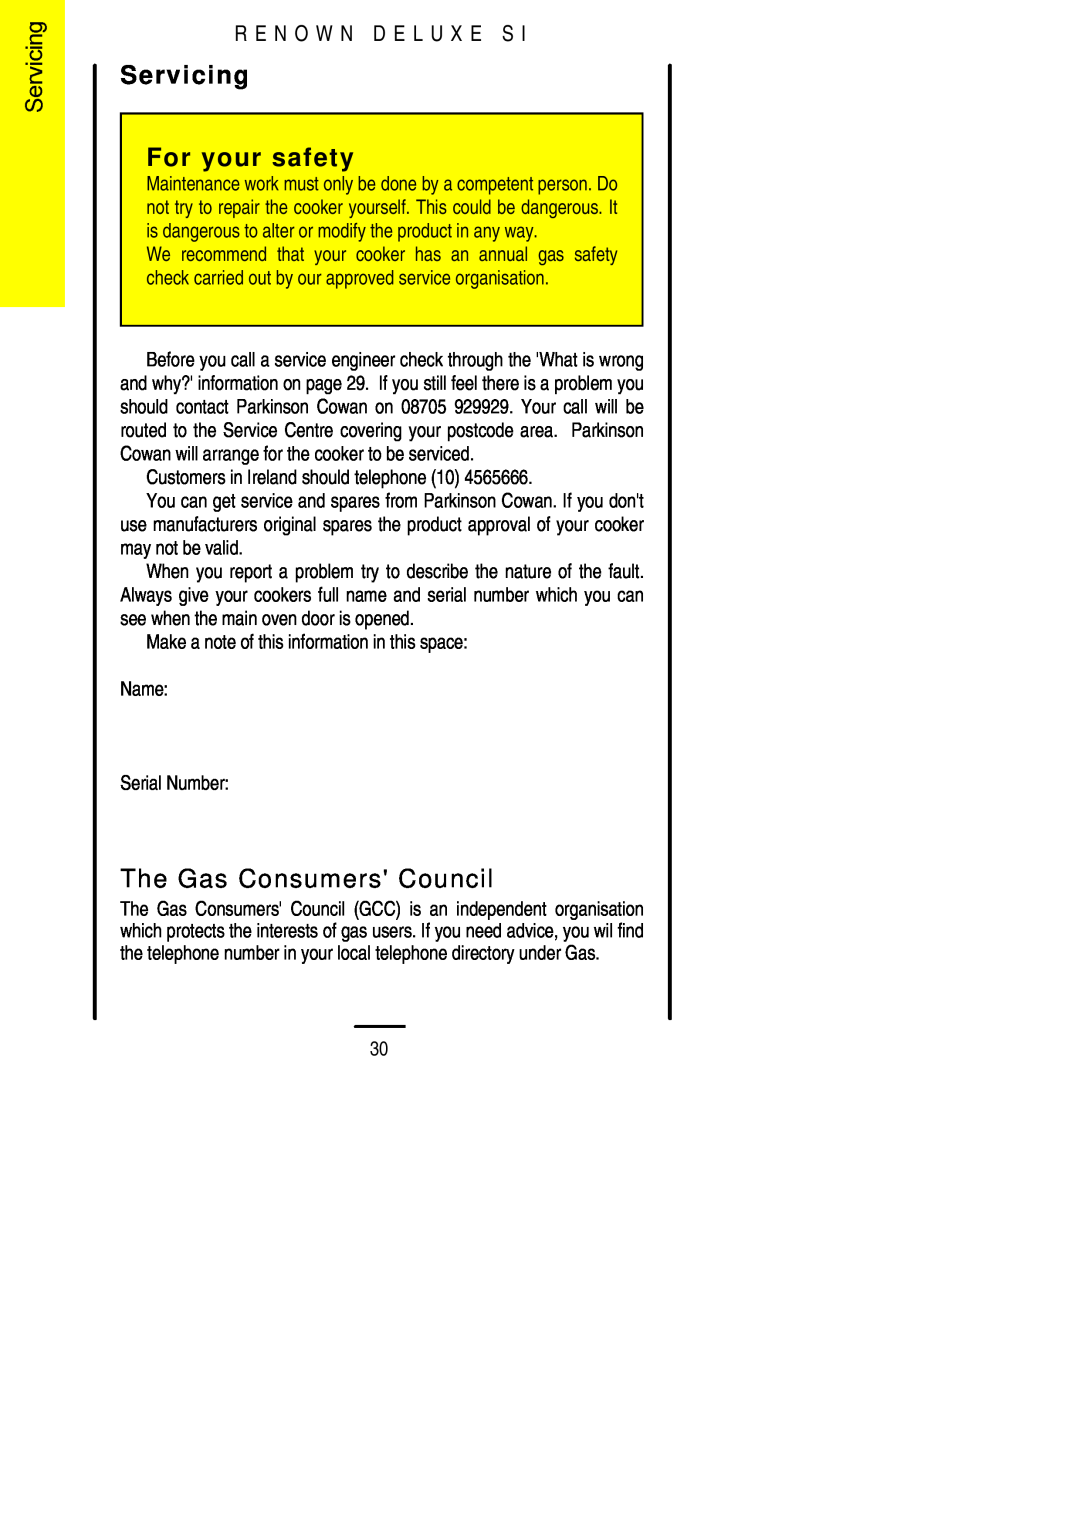 Parkinson Cowan SLIPIN installation instructions Servicing For your safety, The Gas Consumers Council 